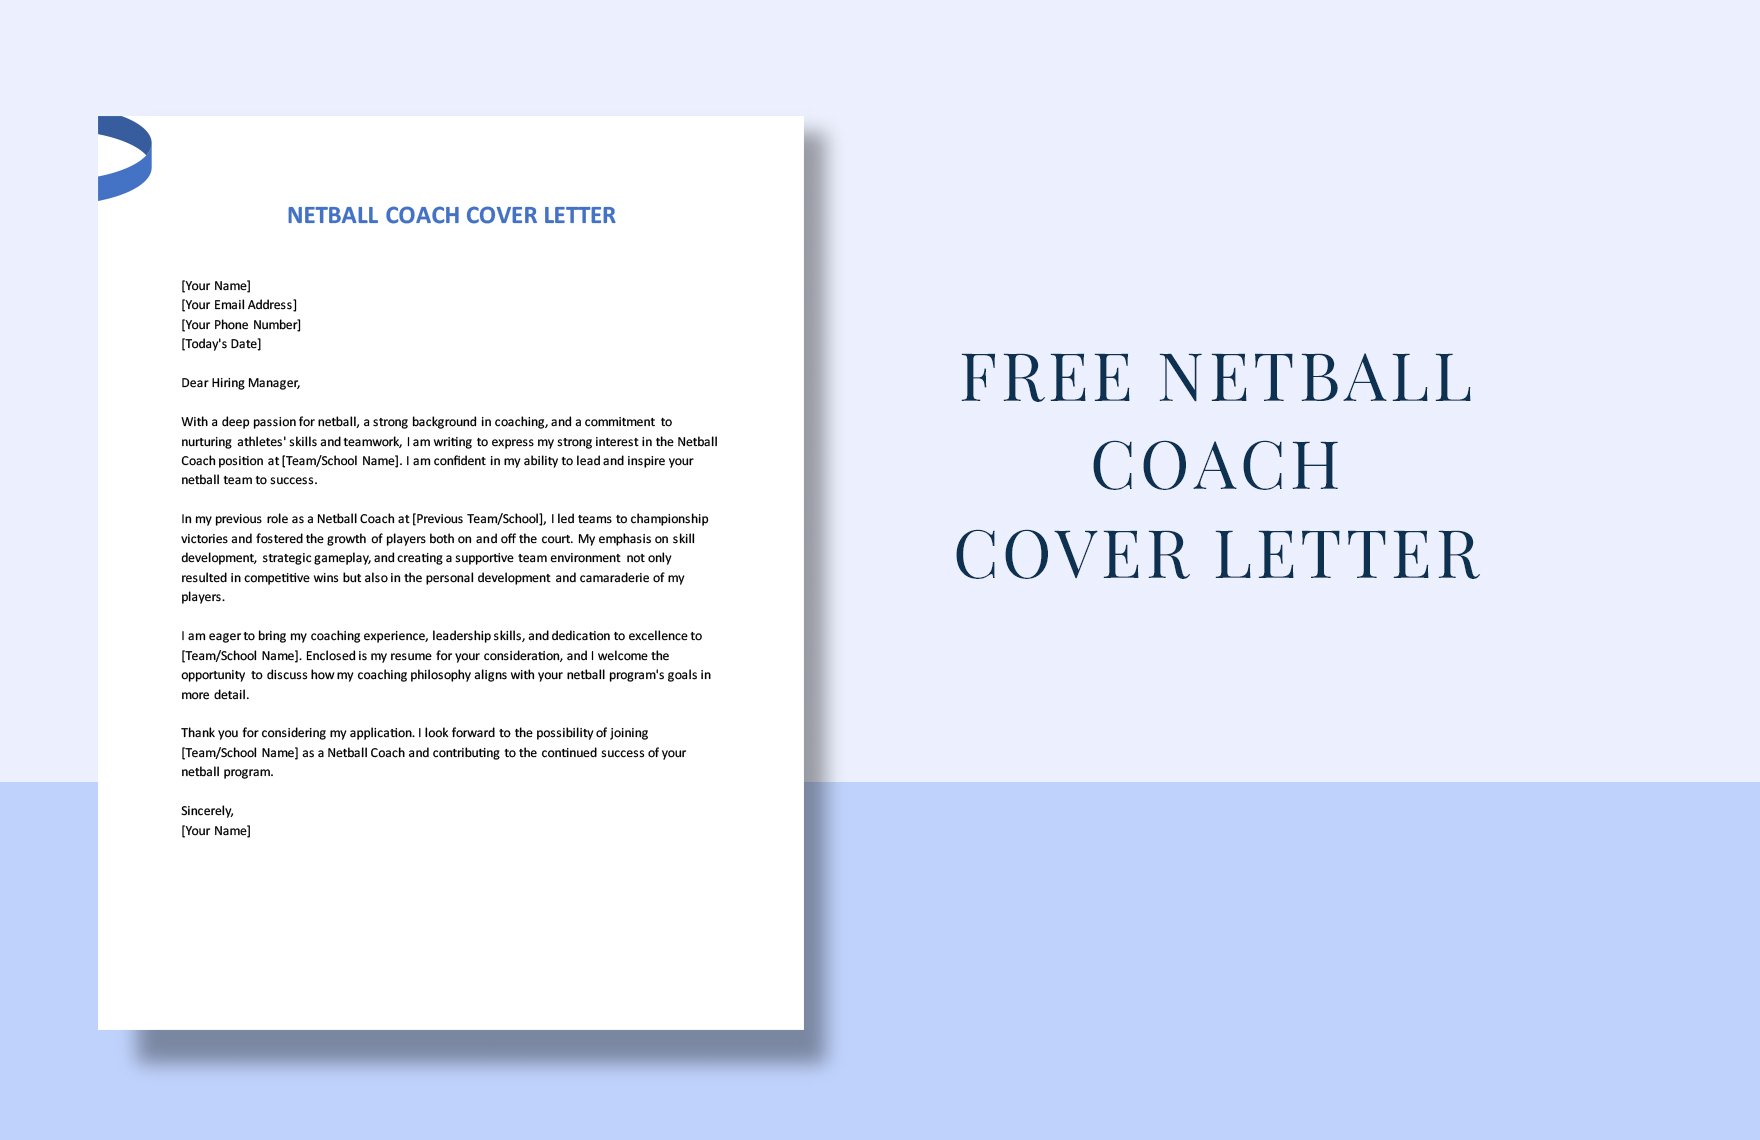 Netball Coach Cover Letter in Word, Google Docs, PDF